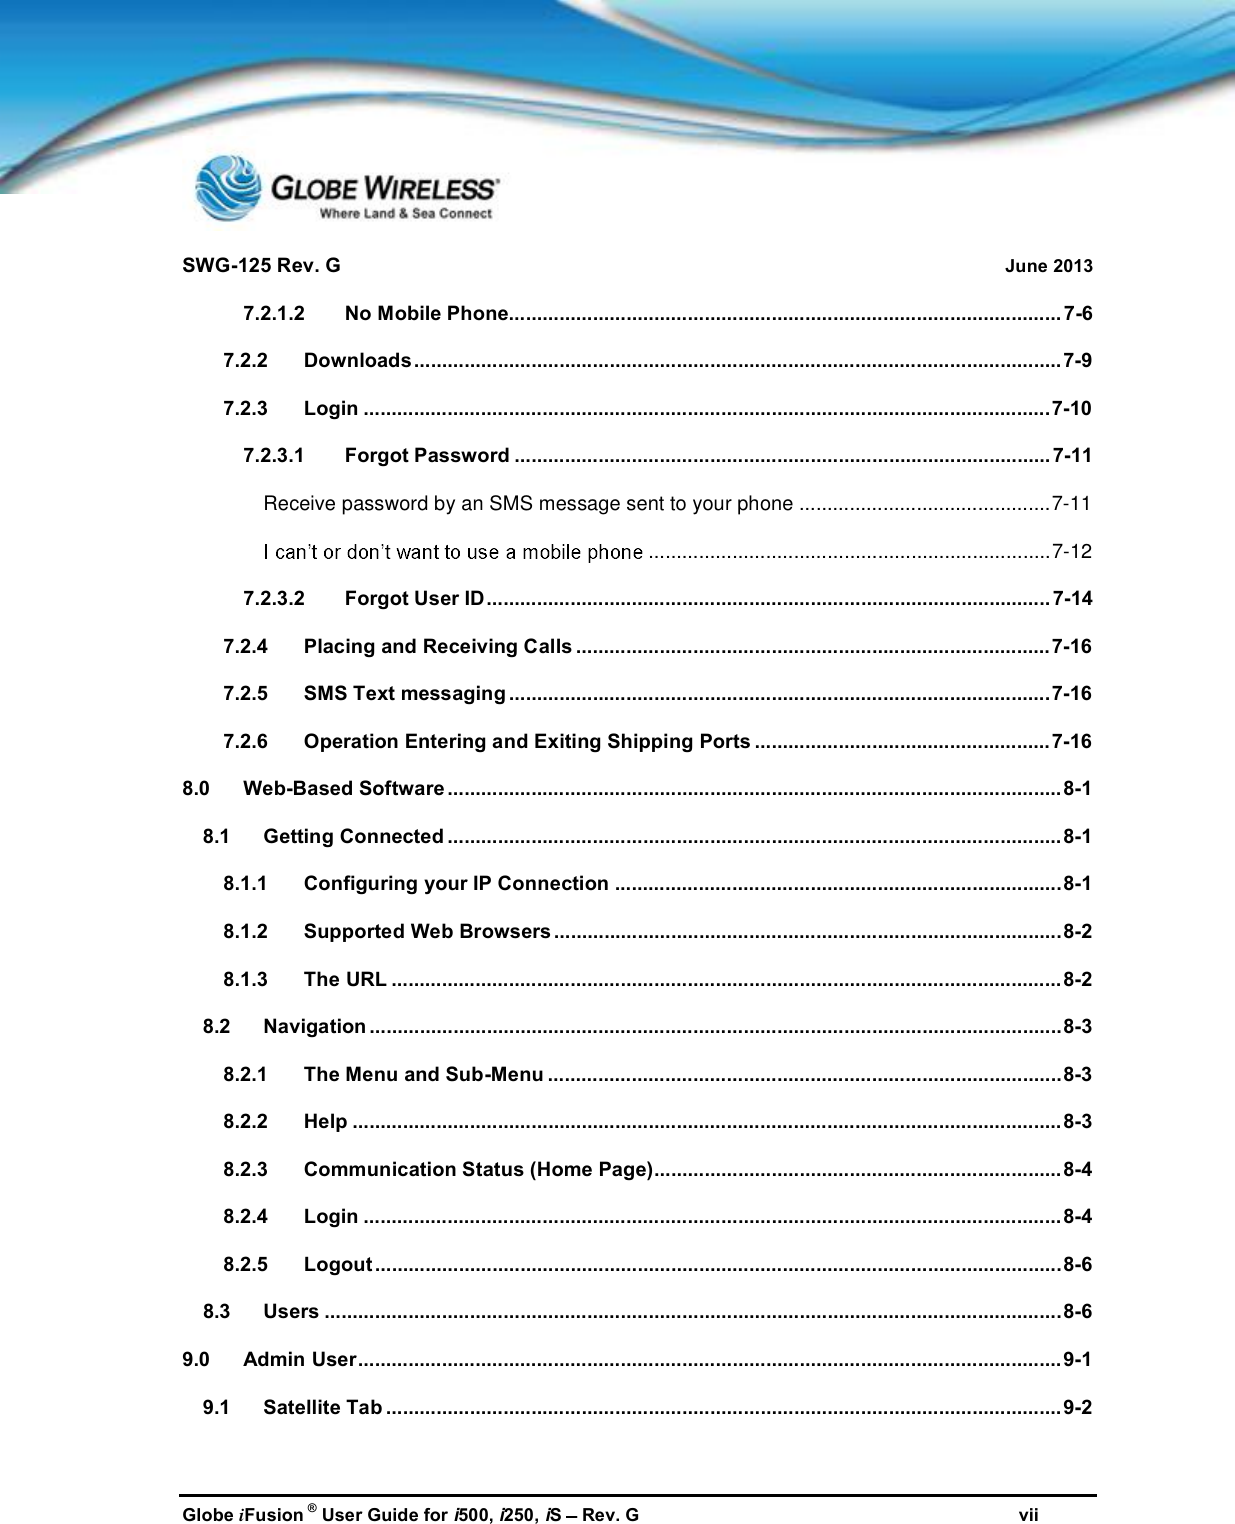 SWG-125 Rev. G June 2013Globe iFusion ®User Guide for i500, i250, iSRev. G vii7.2.1.2 No Mobile Phone................................................................................................... 7-67.2.2 Downloads....................................................................................................................7-97.2.3 Login ...........................................................................................................................7-107.2.3.1 Forgot Password ................................................................................................ 7-11Receive password by an SMS message sent to your phone .............................................7-11........................................................................7-127.2.3.2 Forgot User ID..................................................................................................... 7-147.2.4 Placing and Receiving Calls .....................................................................................7-167.2.5 SMS Text messaging .................................................................................................7-167.2.6 Operation Entering and Exiting Shipping Ports .....................................................7-168.0 Web-Based Software ..............................................................................................................8-18.1 Getting Connected ..............................................................................................................8-18.1.1 Configuring your IP Connection ................................................................................8-18.1.2 Supported Web Browsers ...........................................................................................8-28.1.3 The URL ........................................................................................................................8-28.2 Navigation ............................................................................................................................8-38.2.1 The Menu and Sub-Menu ............................................................................................8-38.2.2 Help ...............................................................................................................................8-38.2.3 Communication Status (Home Page).........................................................................8-48.2.4 Login .............................................................................................................................8-48.2.5 Logout ...........................................................................................................................8-68.3 Users ....................................................................................................................................8-69.0 Admin User..............................................................................................................................9-19.1 Satellite Tab ......................................................................................................................... 9-2